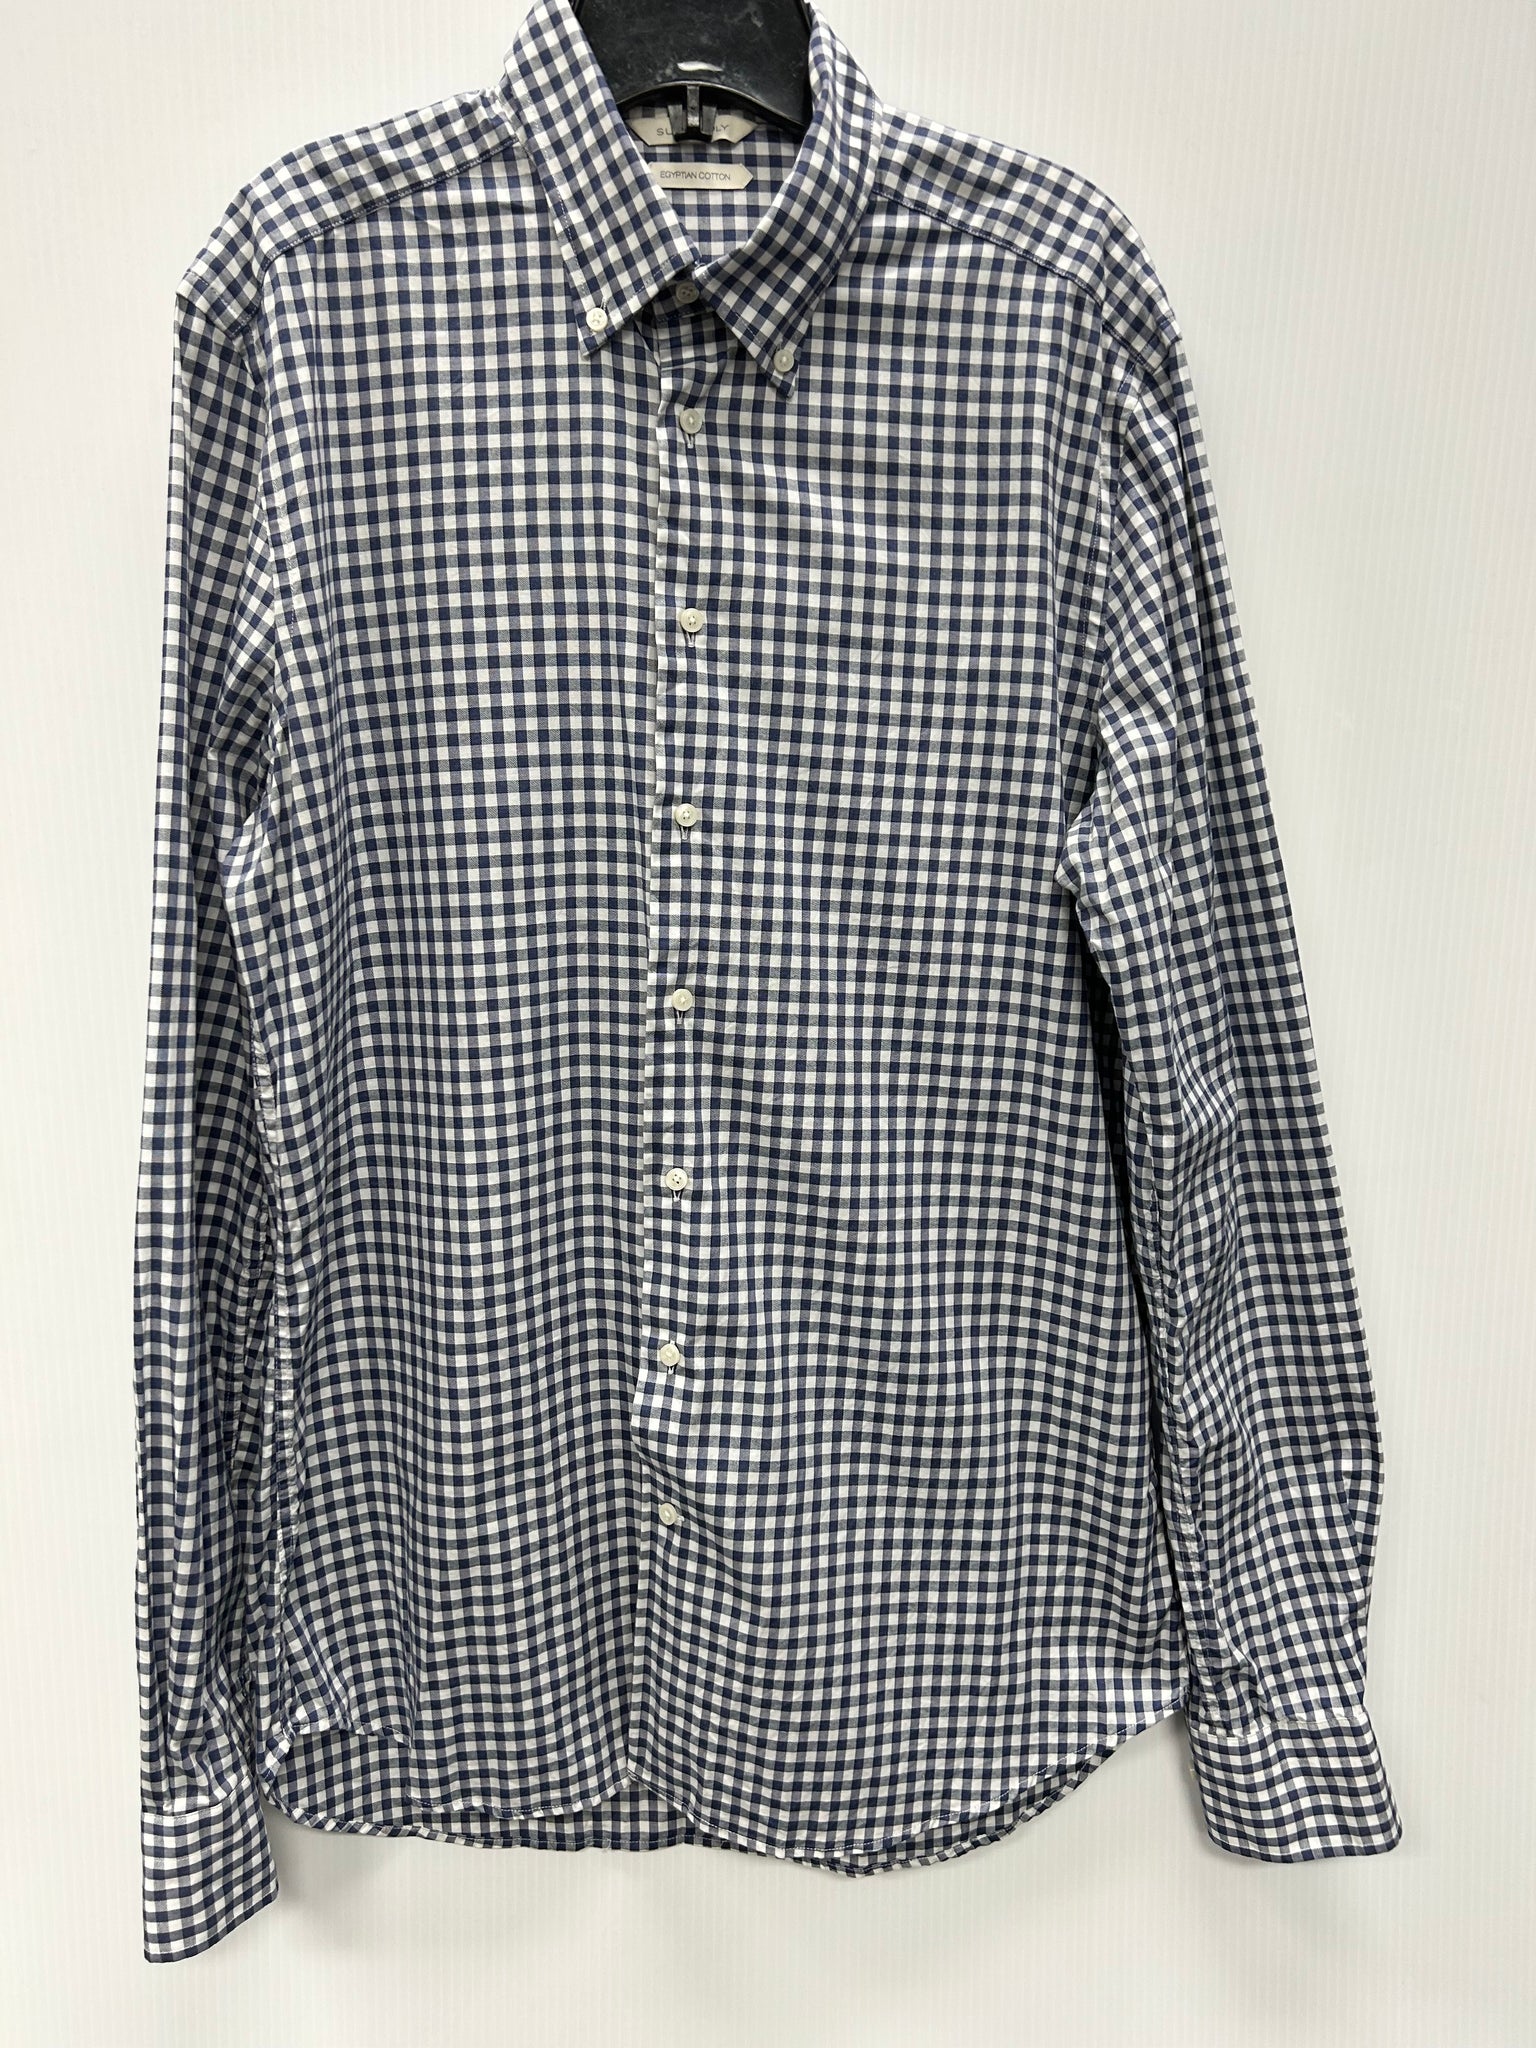 Size 16L Suitsupply Shirt #21086